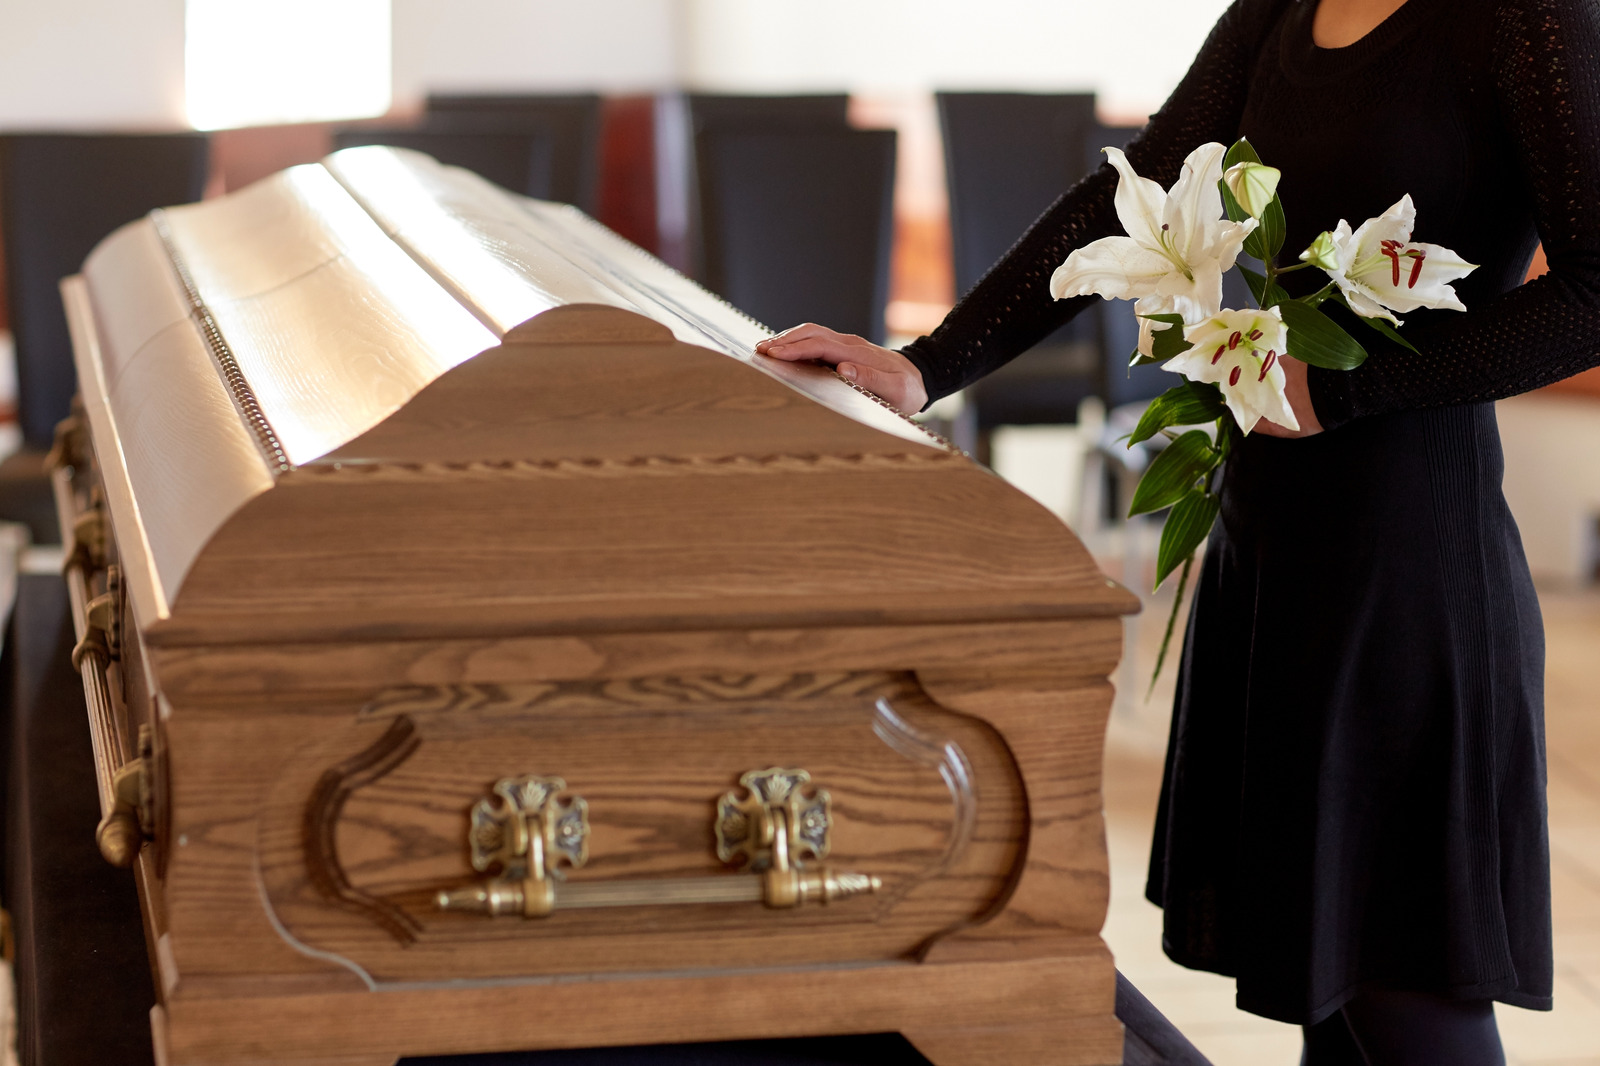 How do Anthyesti funeral services help people?